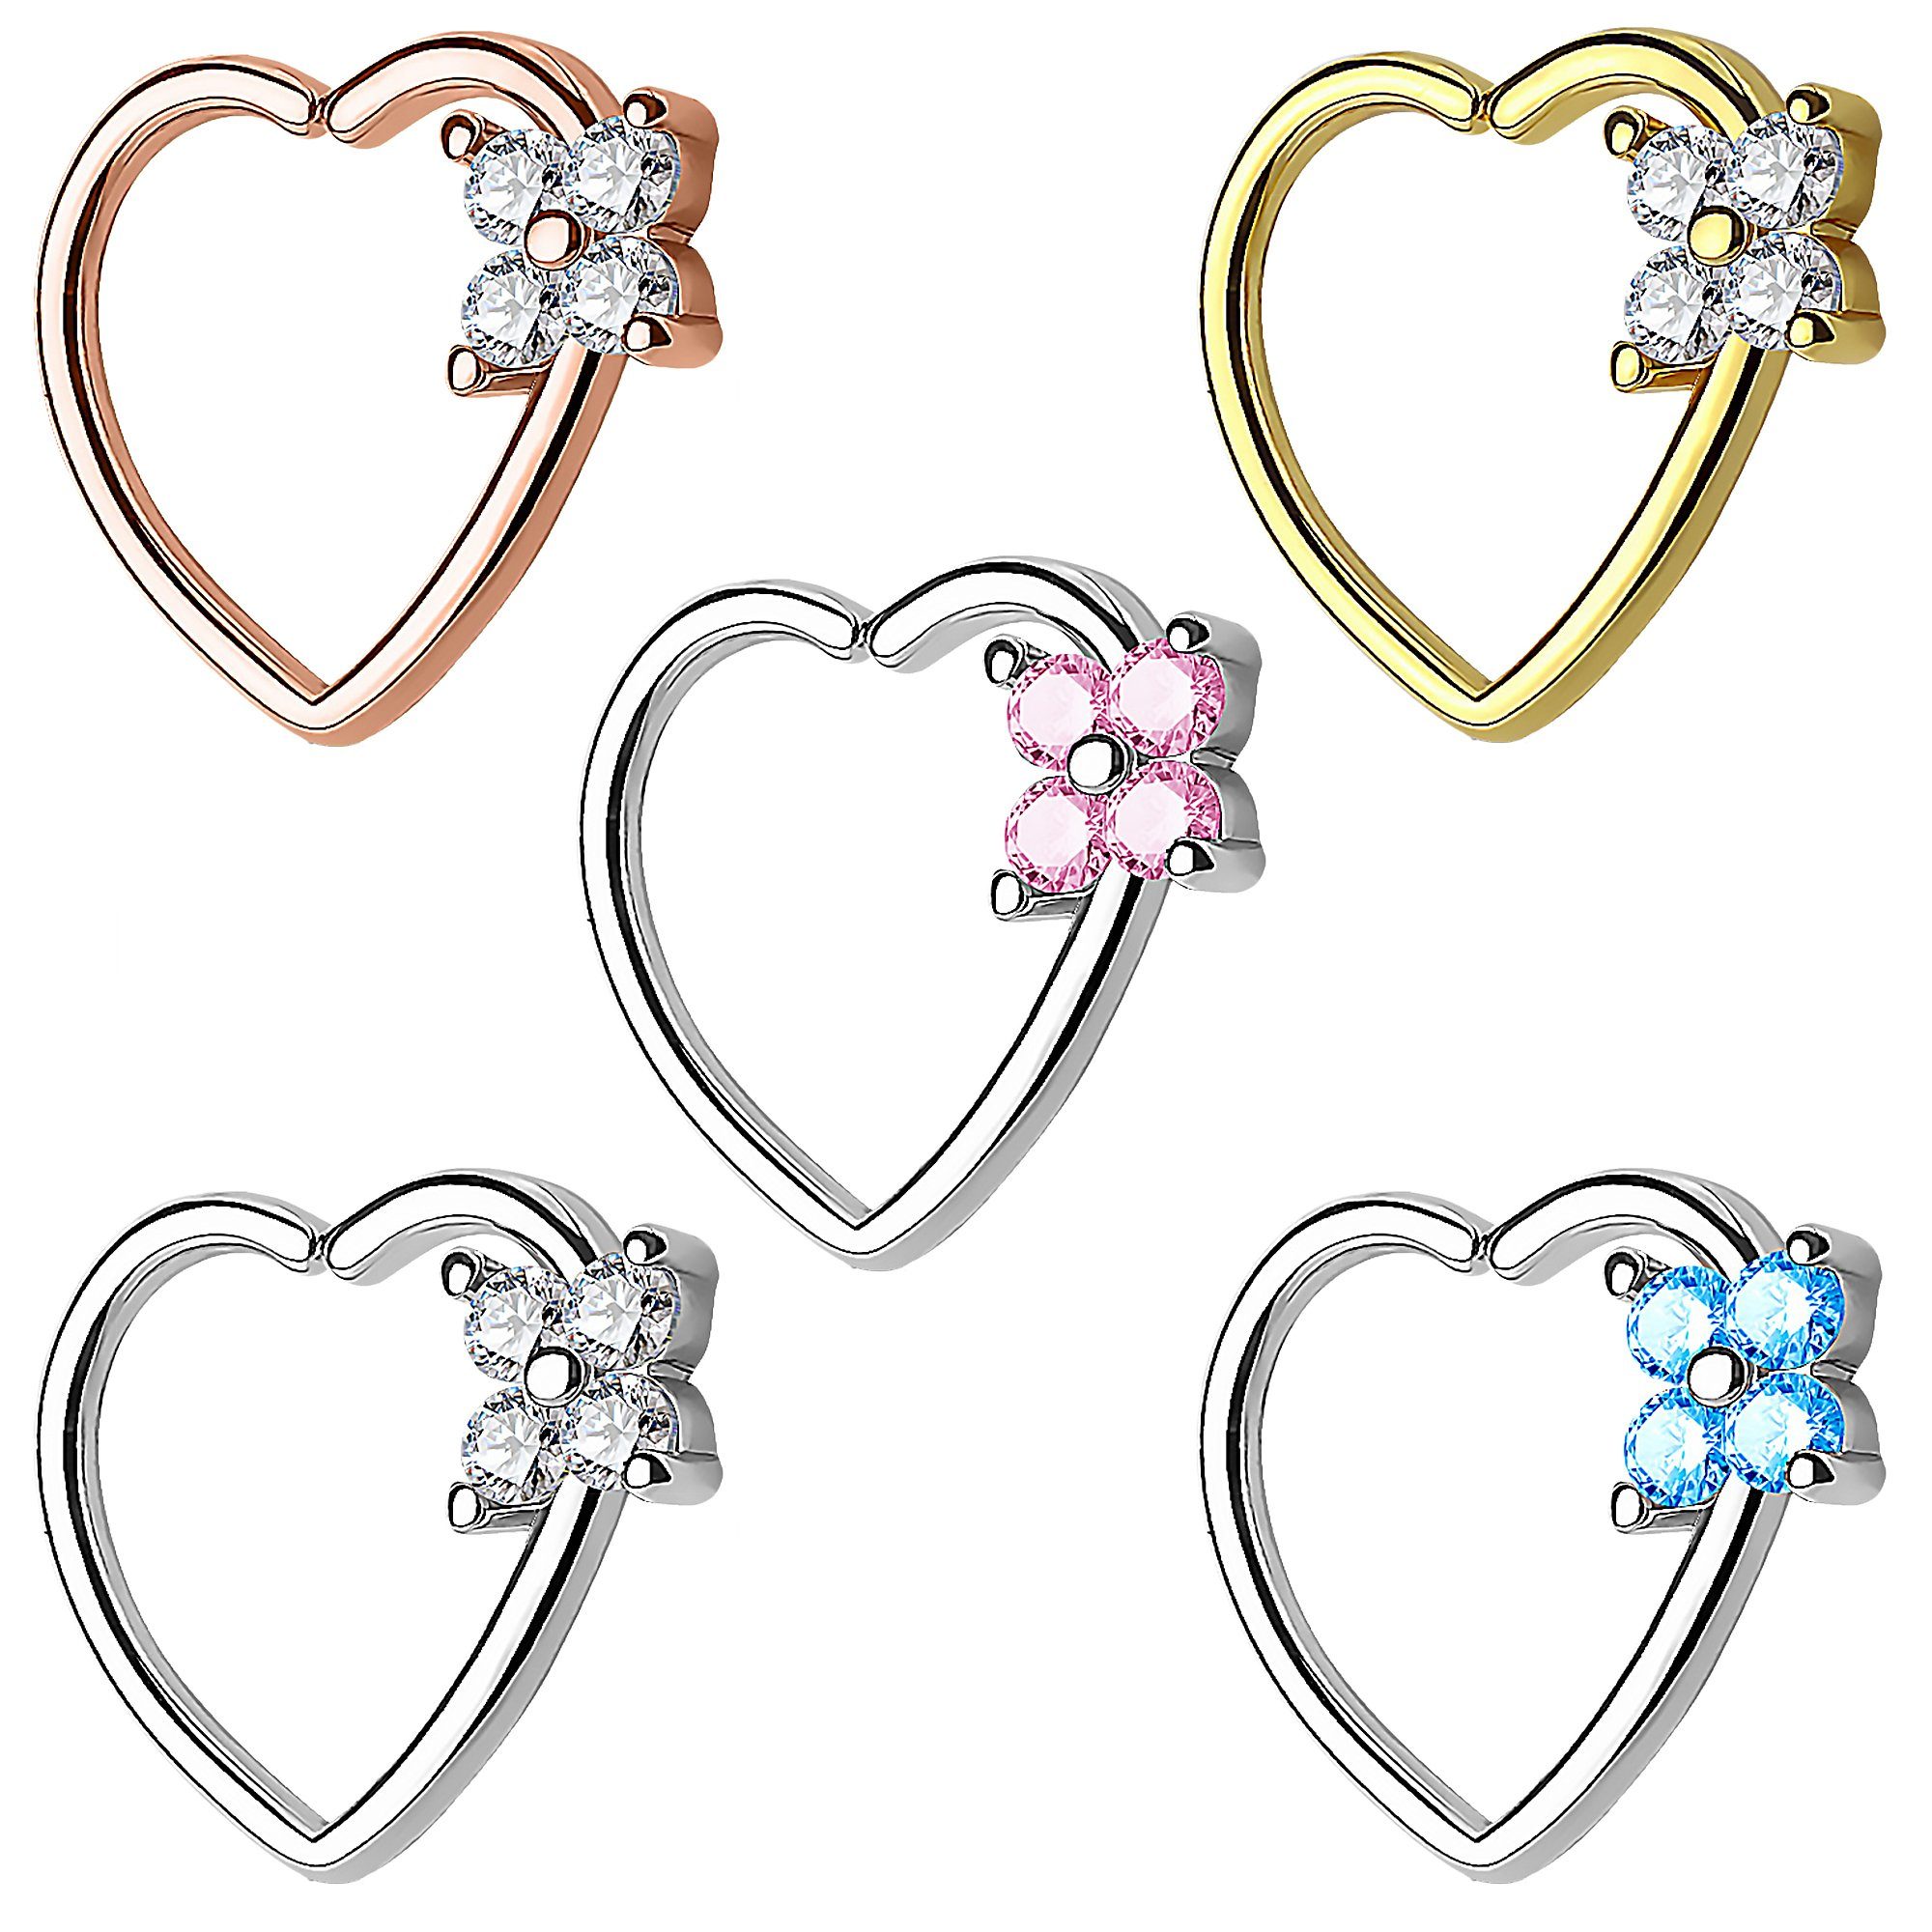 Ring Kristall Strass Piercing - Clear Herz Ring Silber Ohrpiercing Tragus Blume, Piercing-Set Continuous Helix Cartilage Kleeblatt Taffstyle Ohr Knorpel